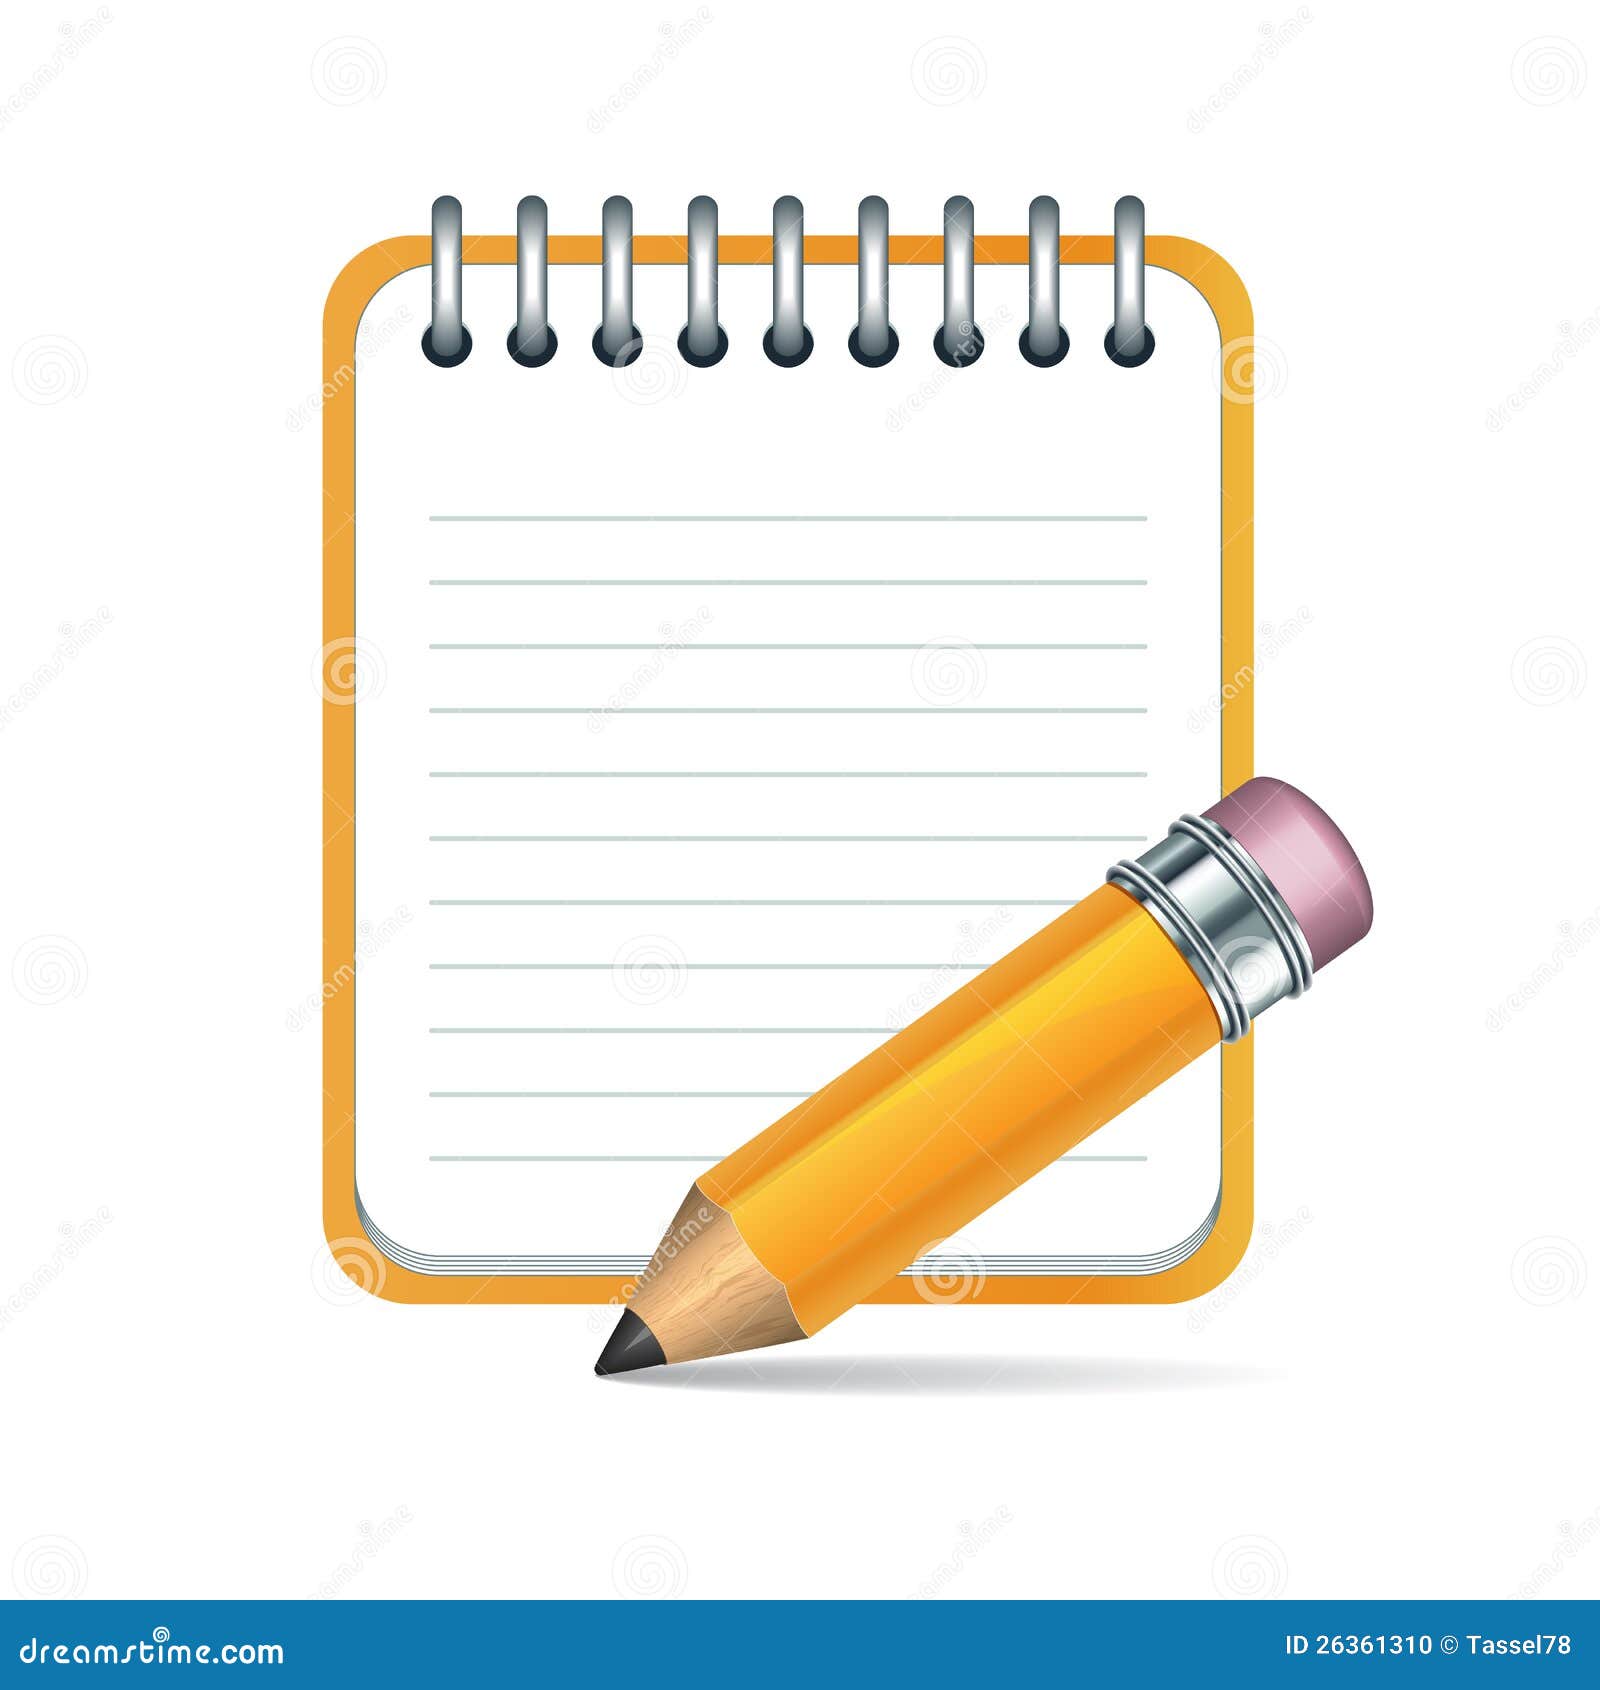  pencil and notepad icon